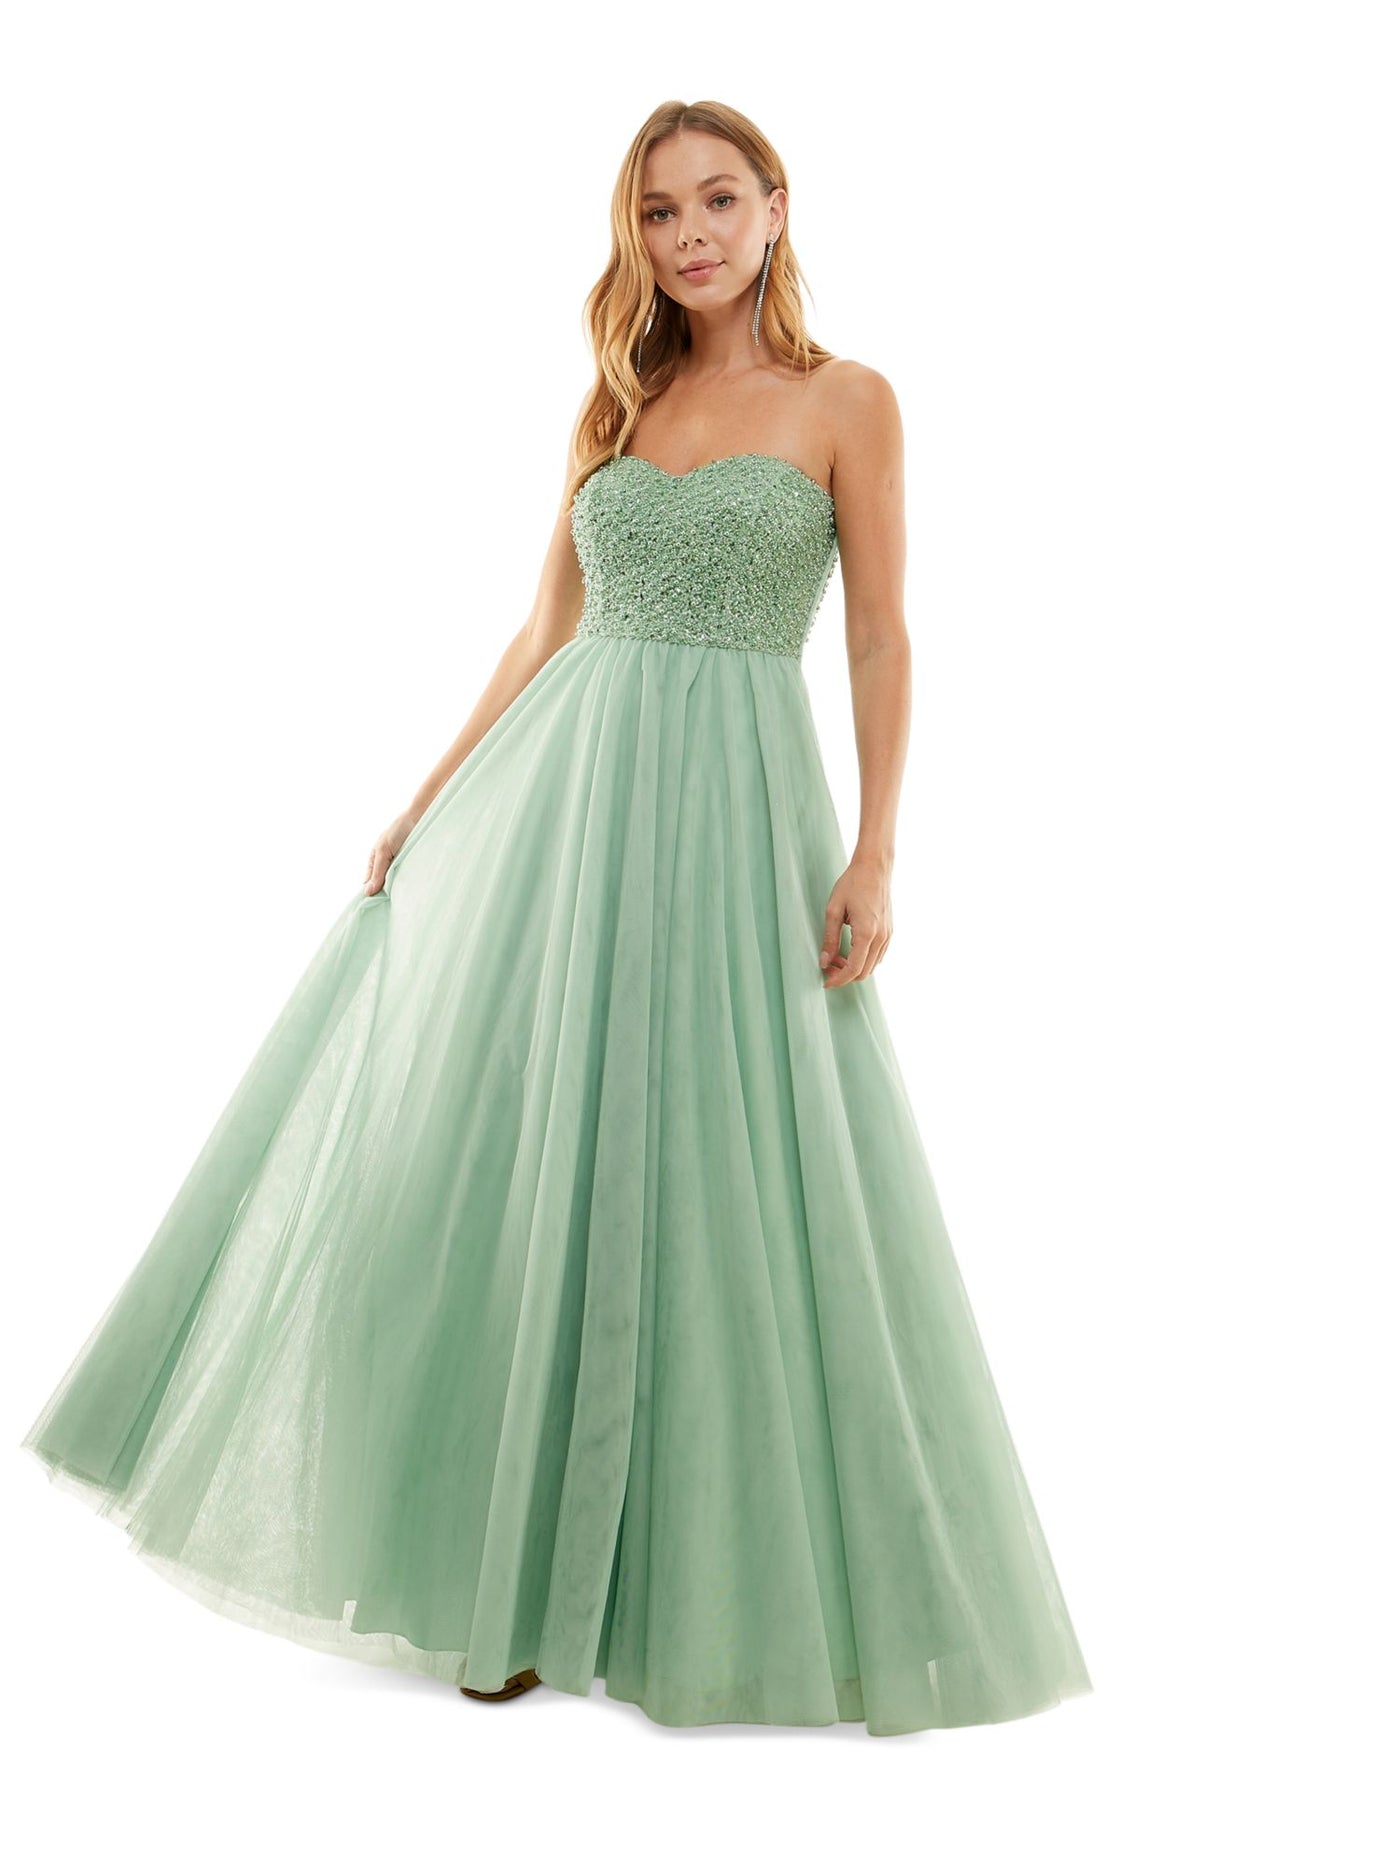 SAY YES TO THE PROM Womens Green Embellished Zippered Padded Lined Tulle Mesh Sleeveless Sweetheart Neckline Full-Length Party Gown Dress 1